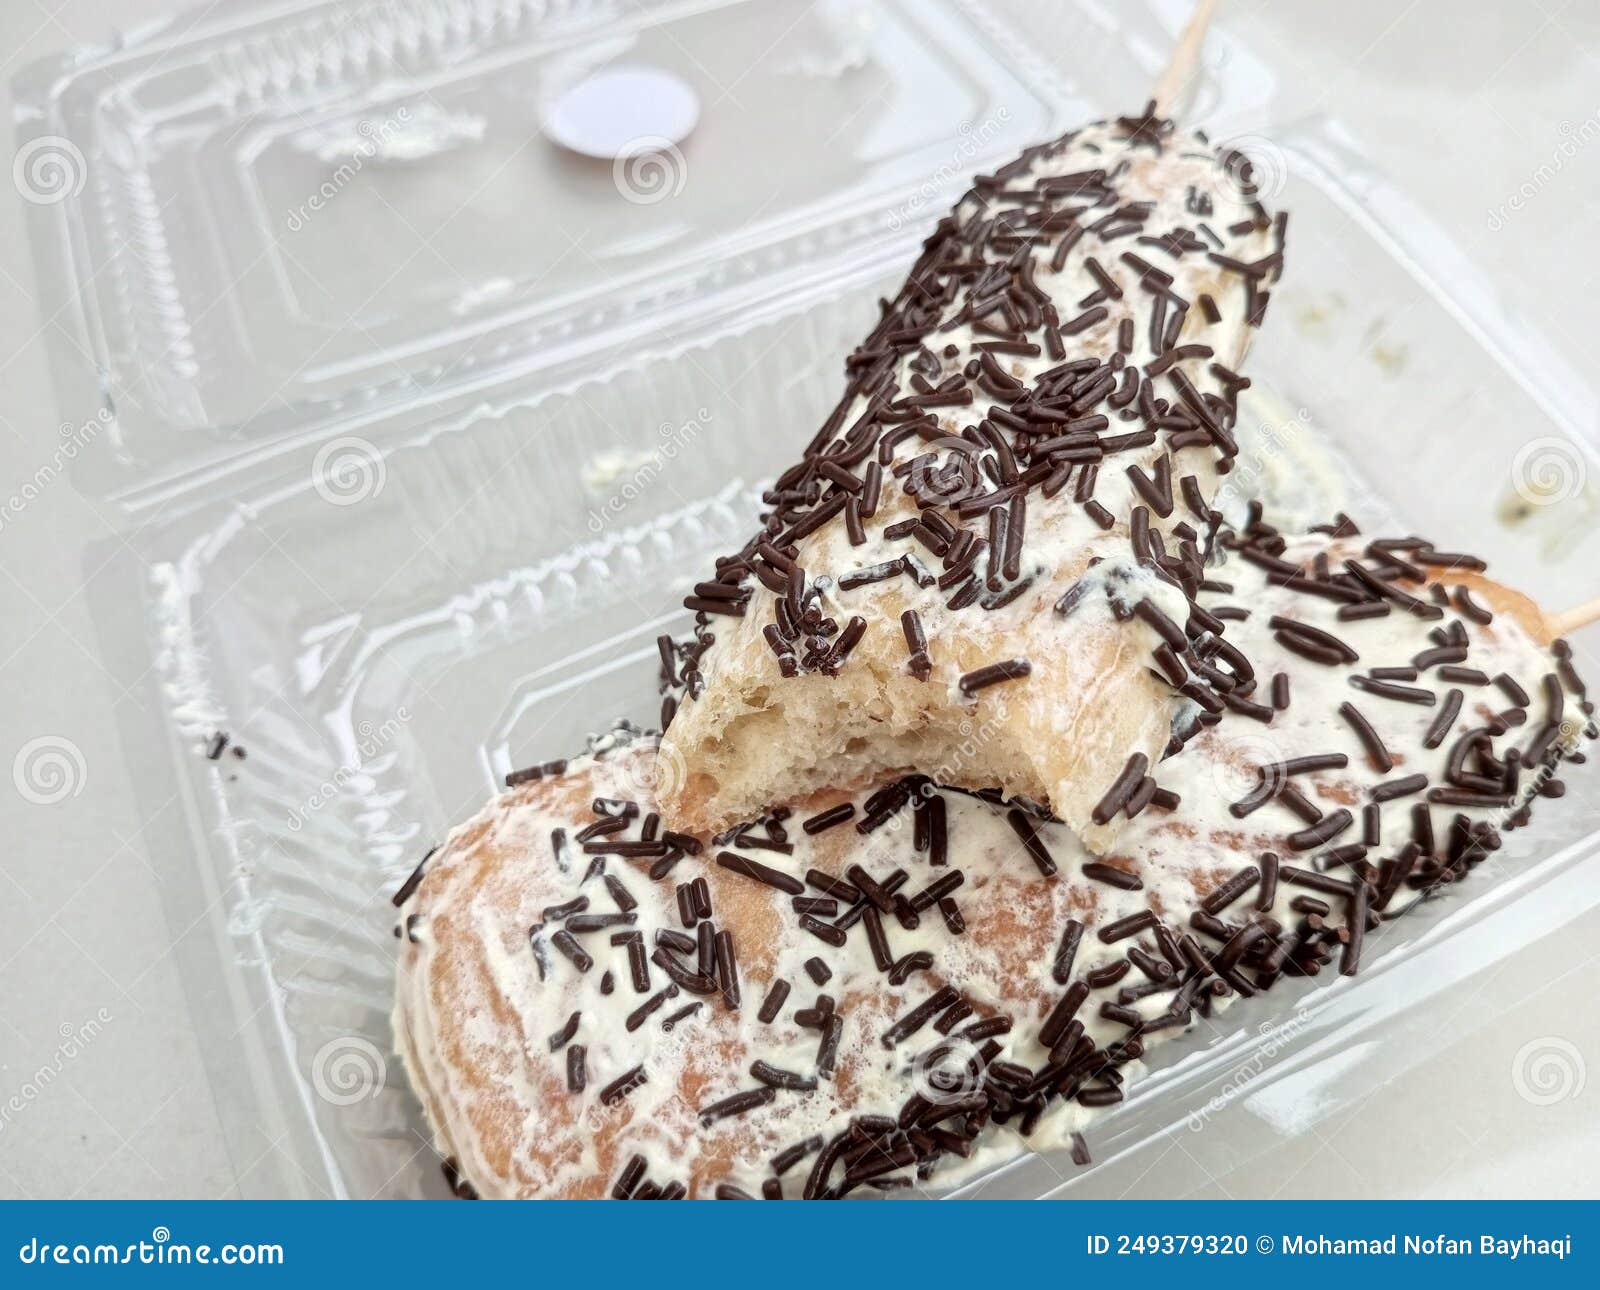 one of the typical indonesian street food which is usually called a skewer donut with many variations of toppings